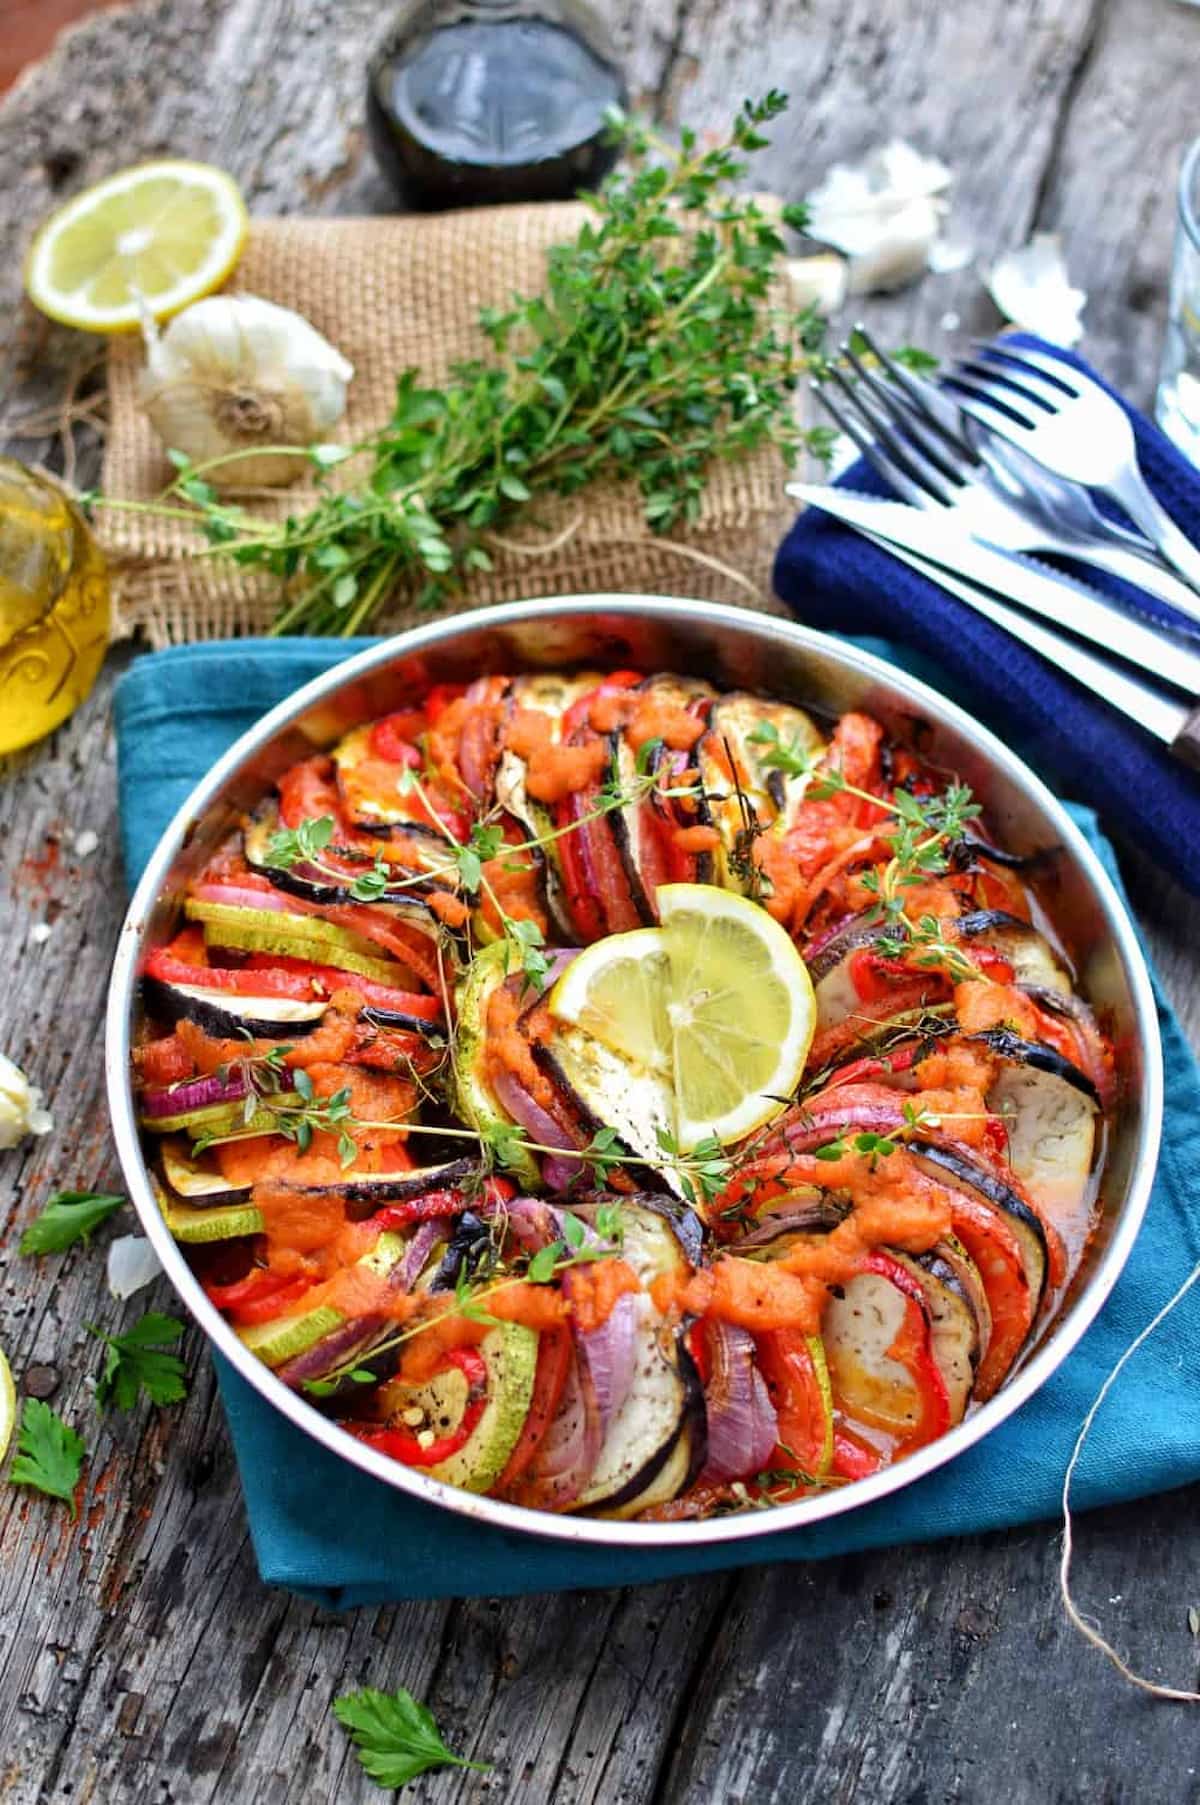 Ratatouille, served with lemon slices.